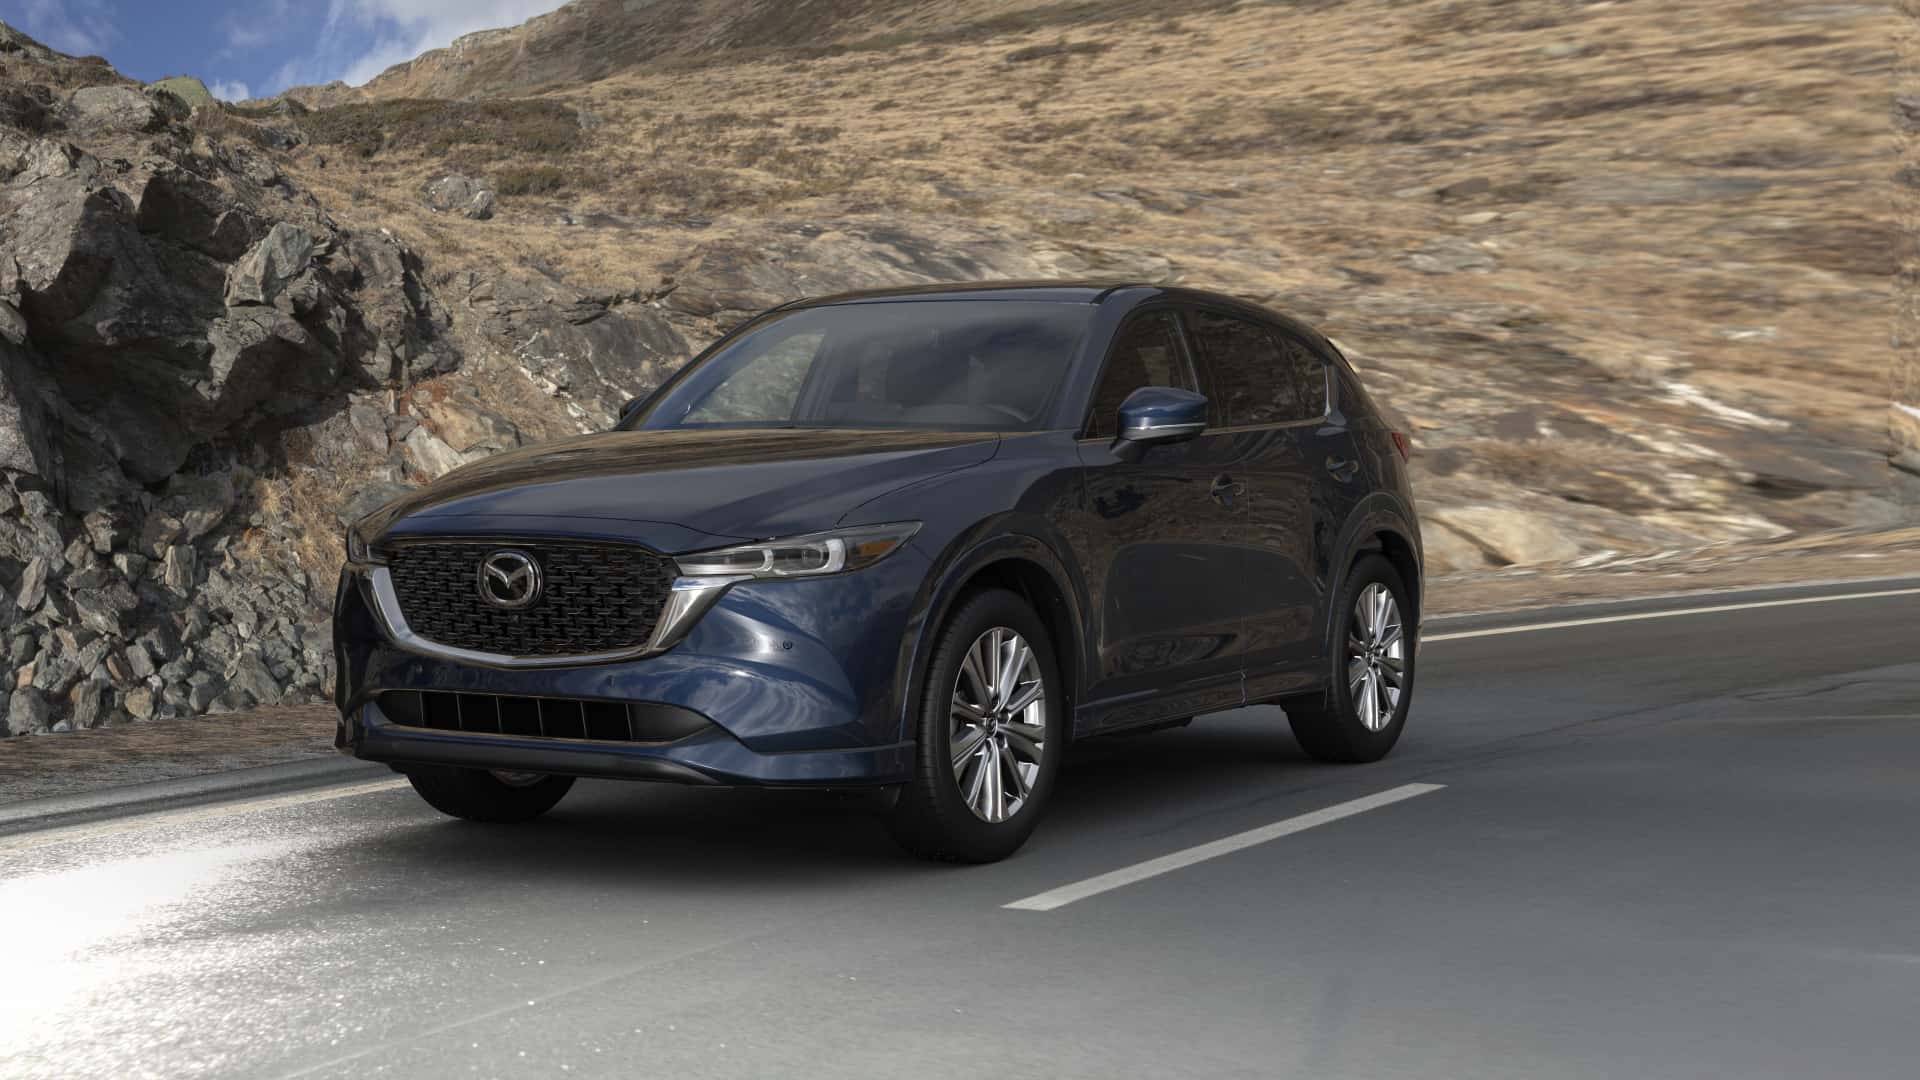 2023 Mazda CX-5 2.5 Turbo Signature Deep Crystal Blue Mica| Koons Mazda Silver Spring in Silver Spring MD